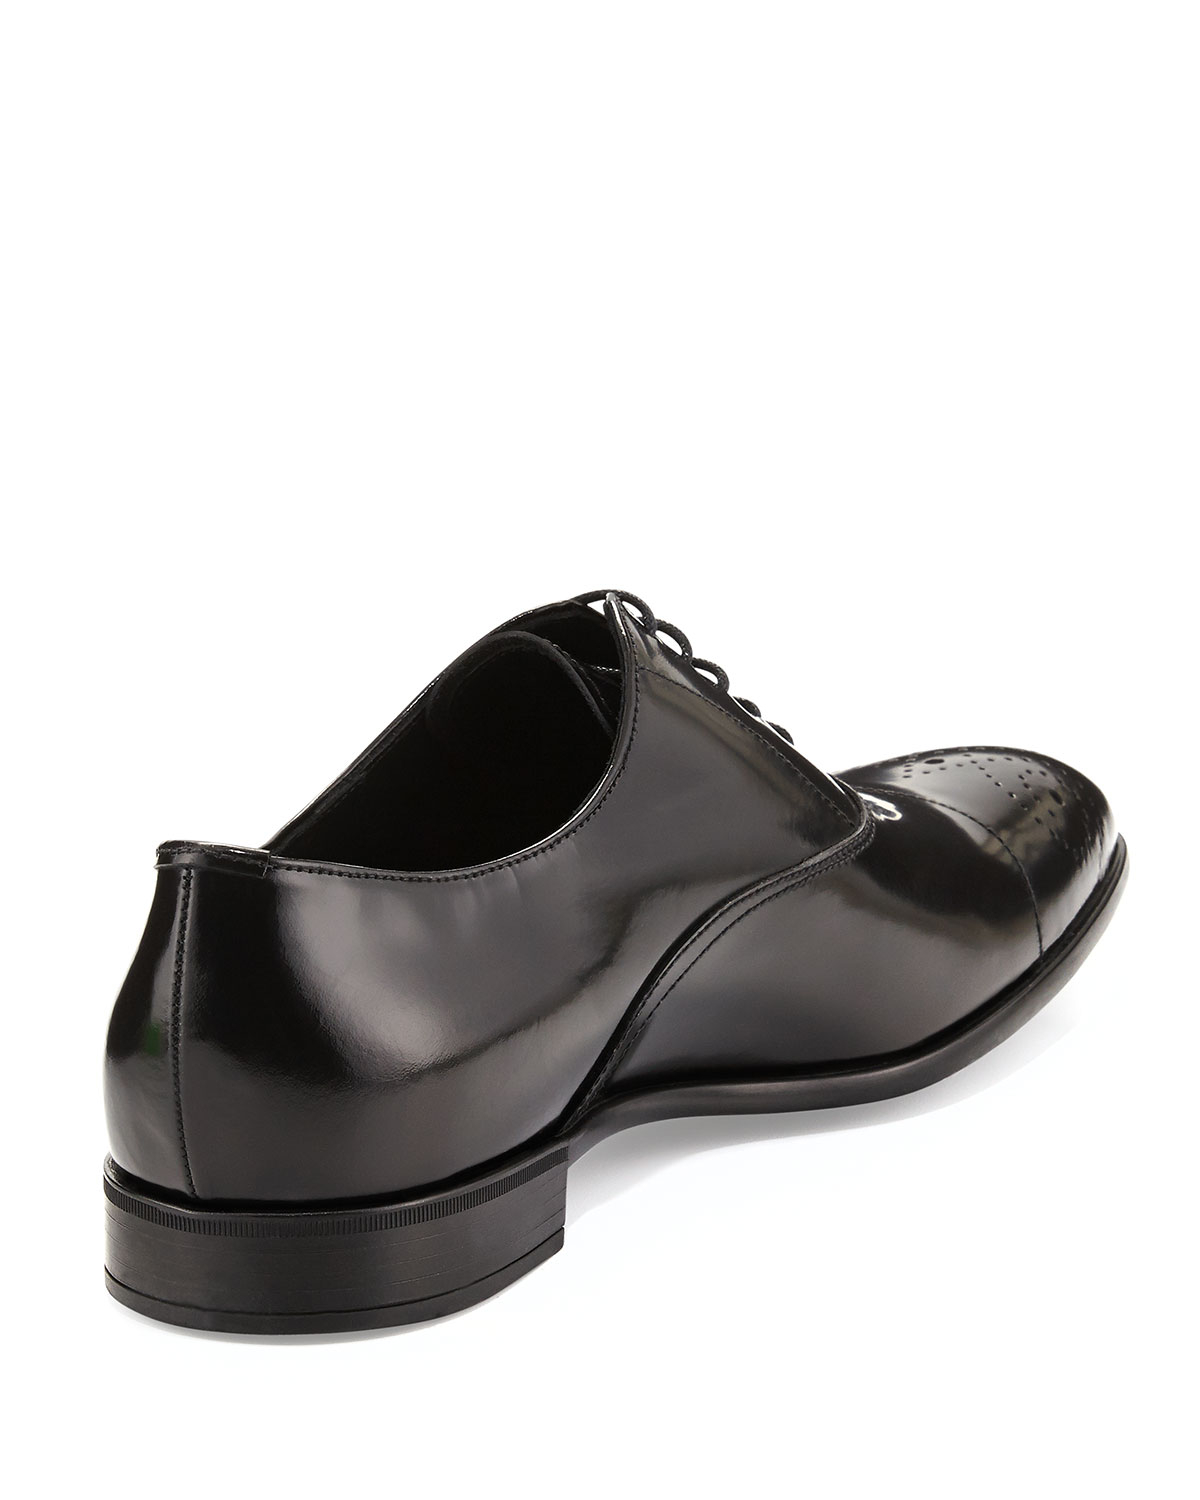 Lyst - Prada Lace-up Leather Dress Shoe in Black for Men